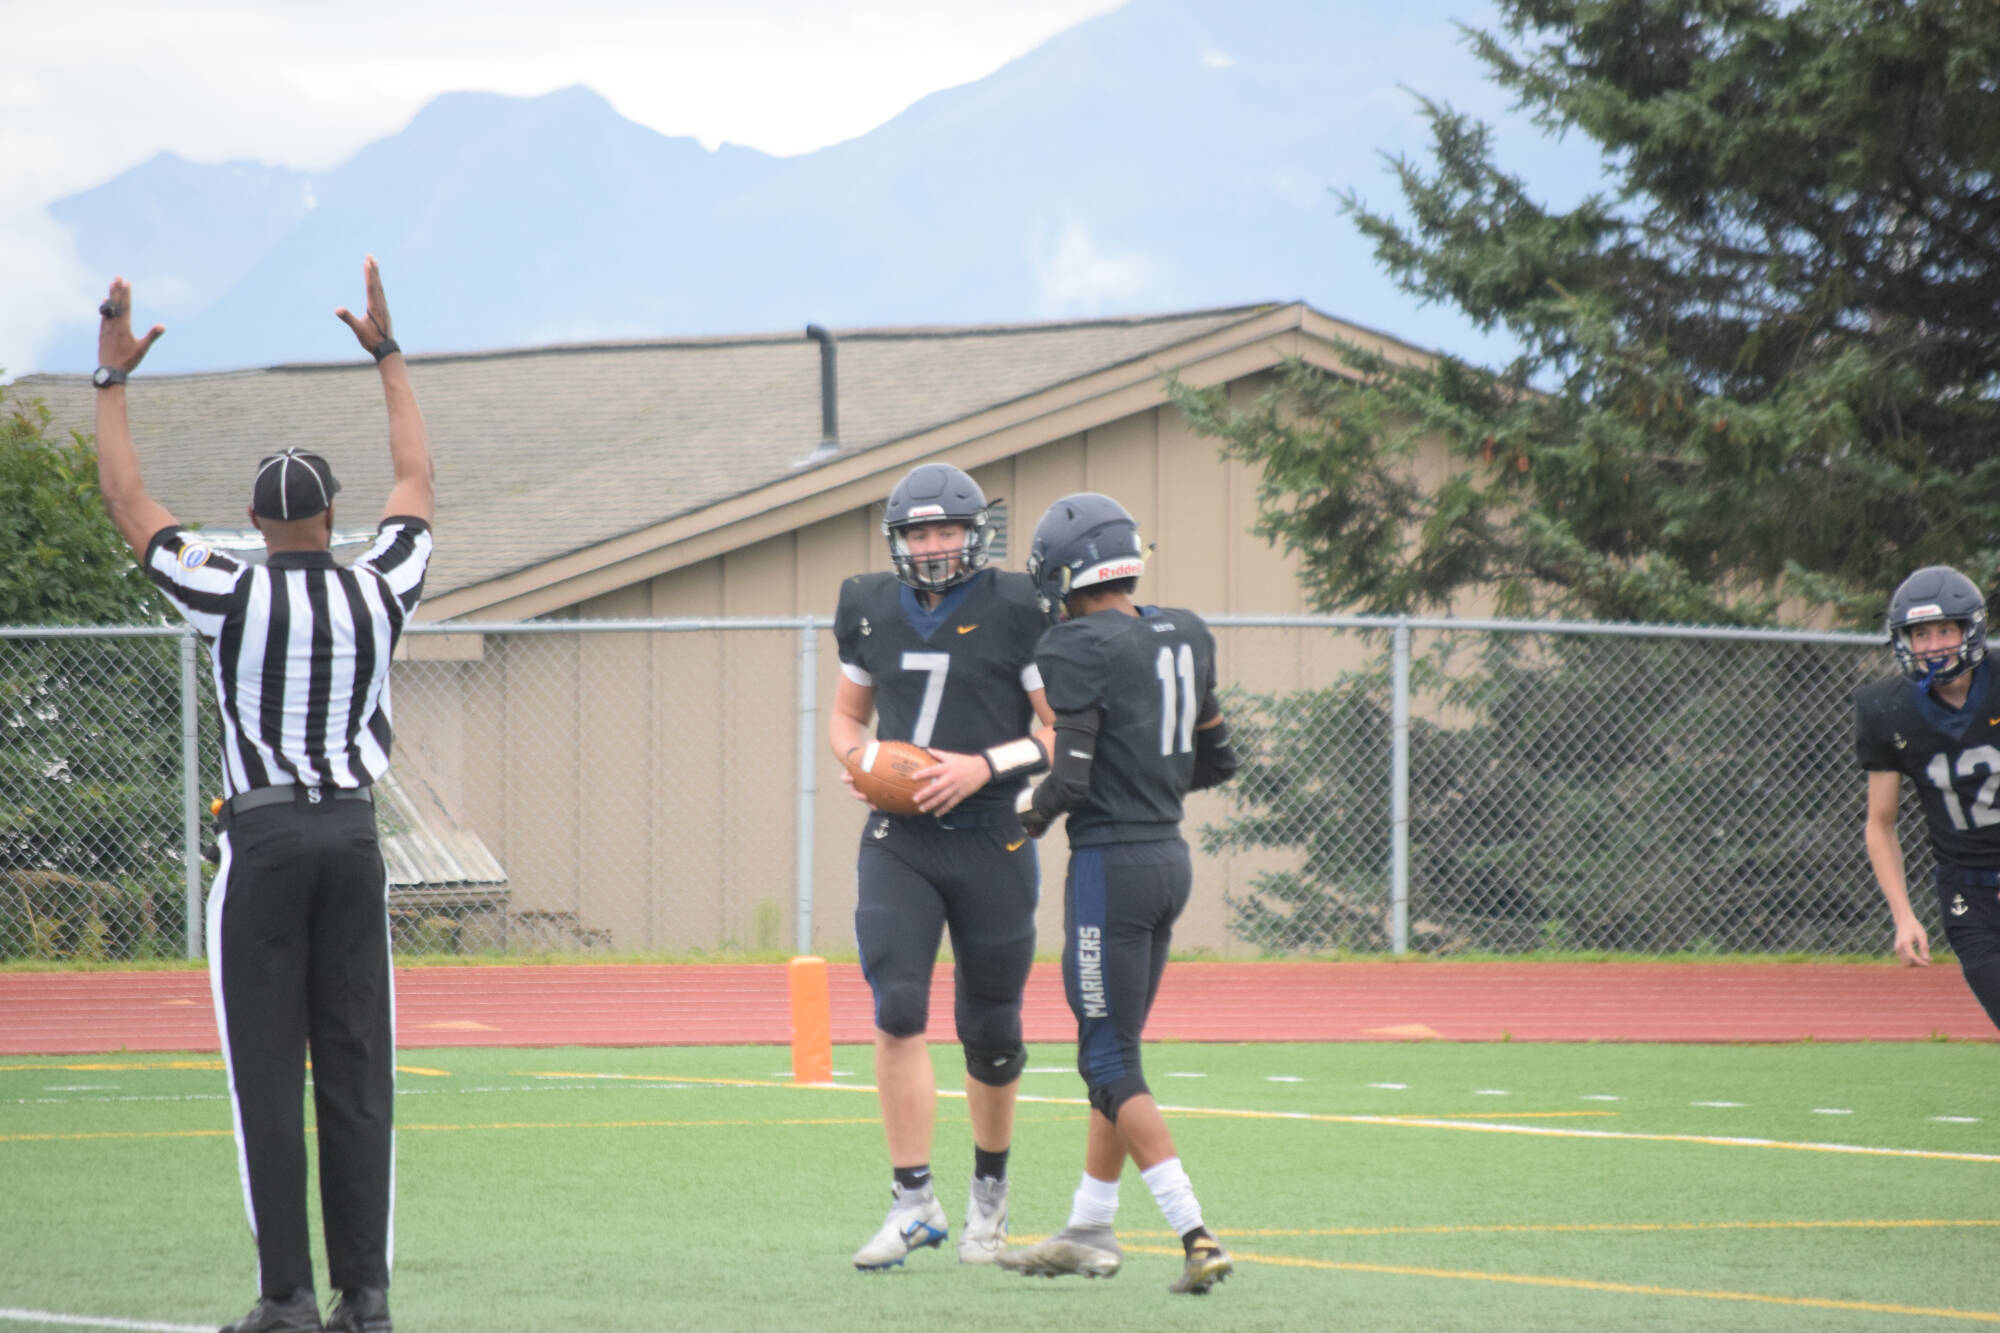 Carter Tennison and Morgan Techie celebrate a touchdown on Friday, Aug. 26 at Homer High School Field in Homer, Alaska. (Photo by Charlie Menke/Homer News)